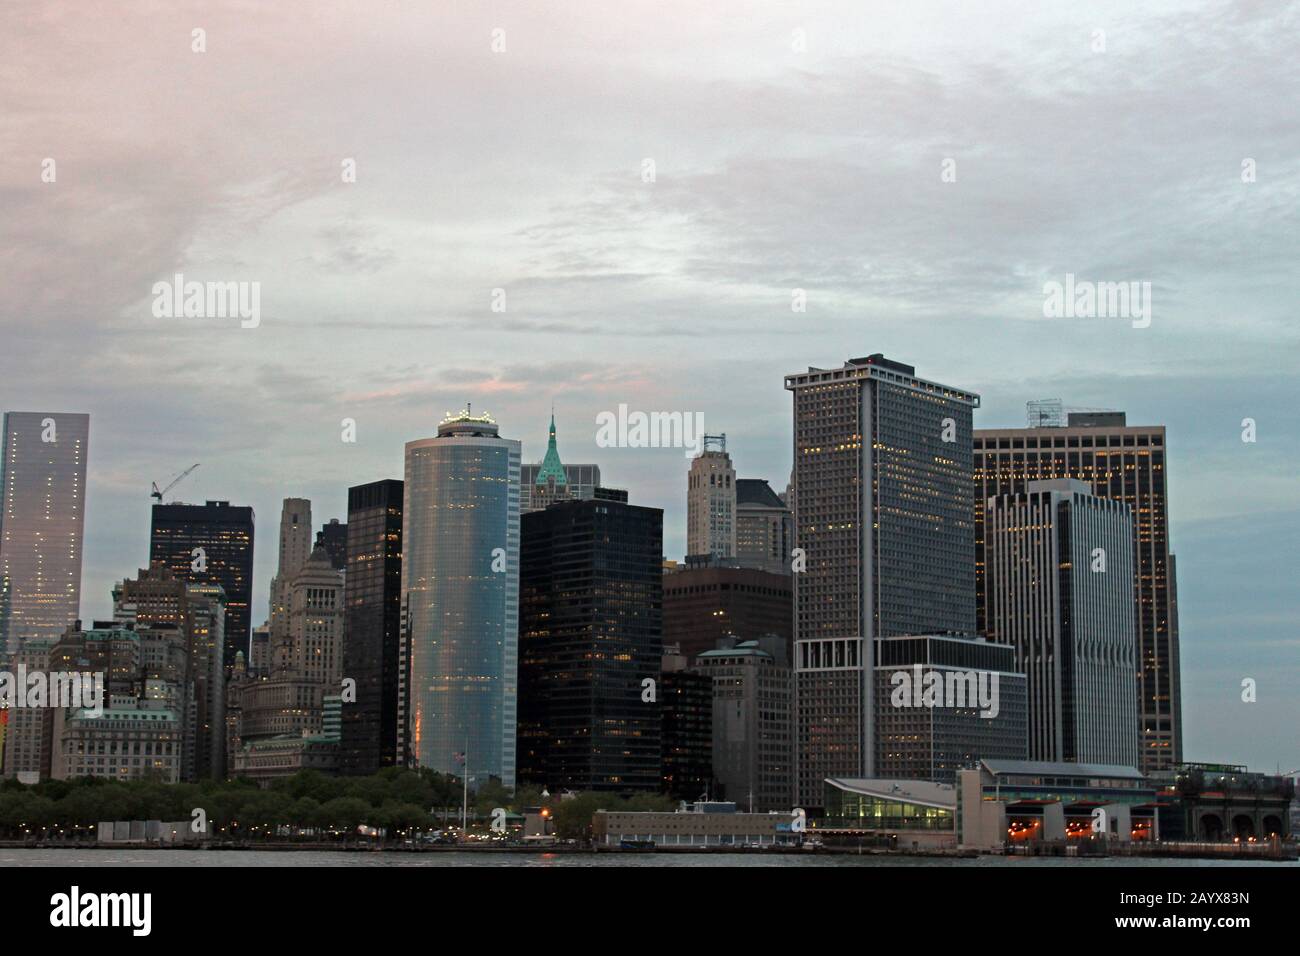 The partial view of Manhattan, inside the Staten island ferry! Stock Photo